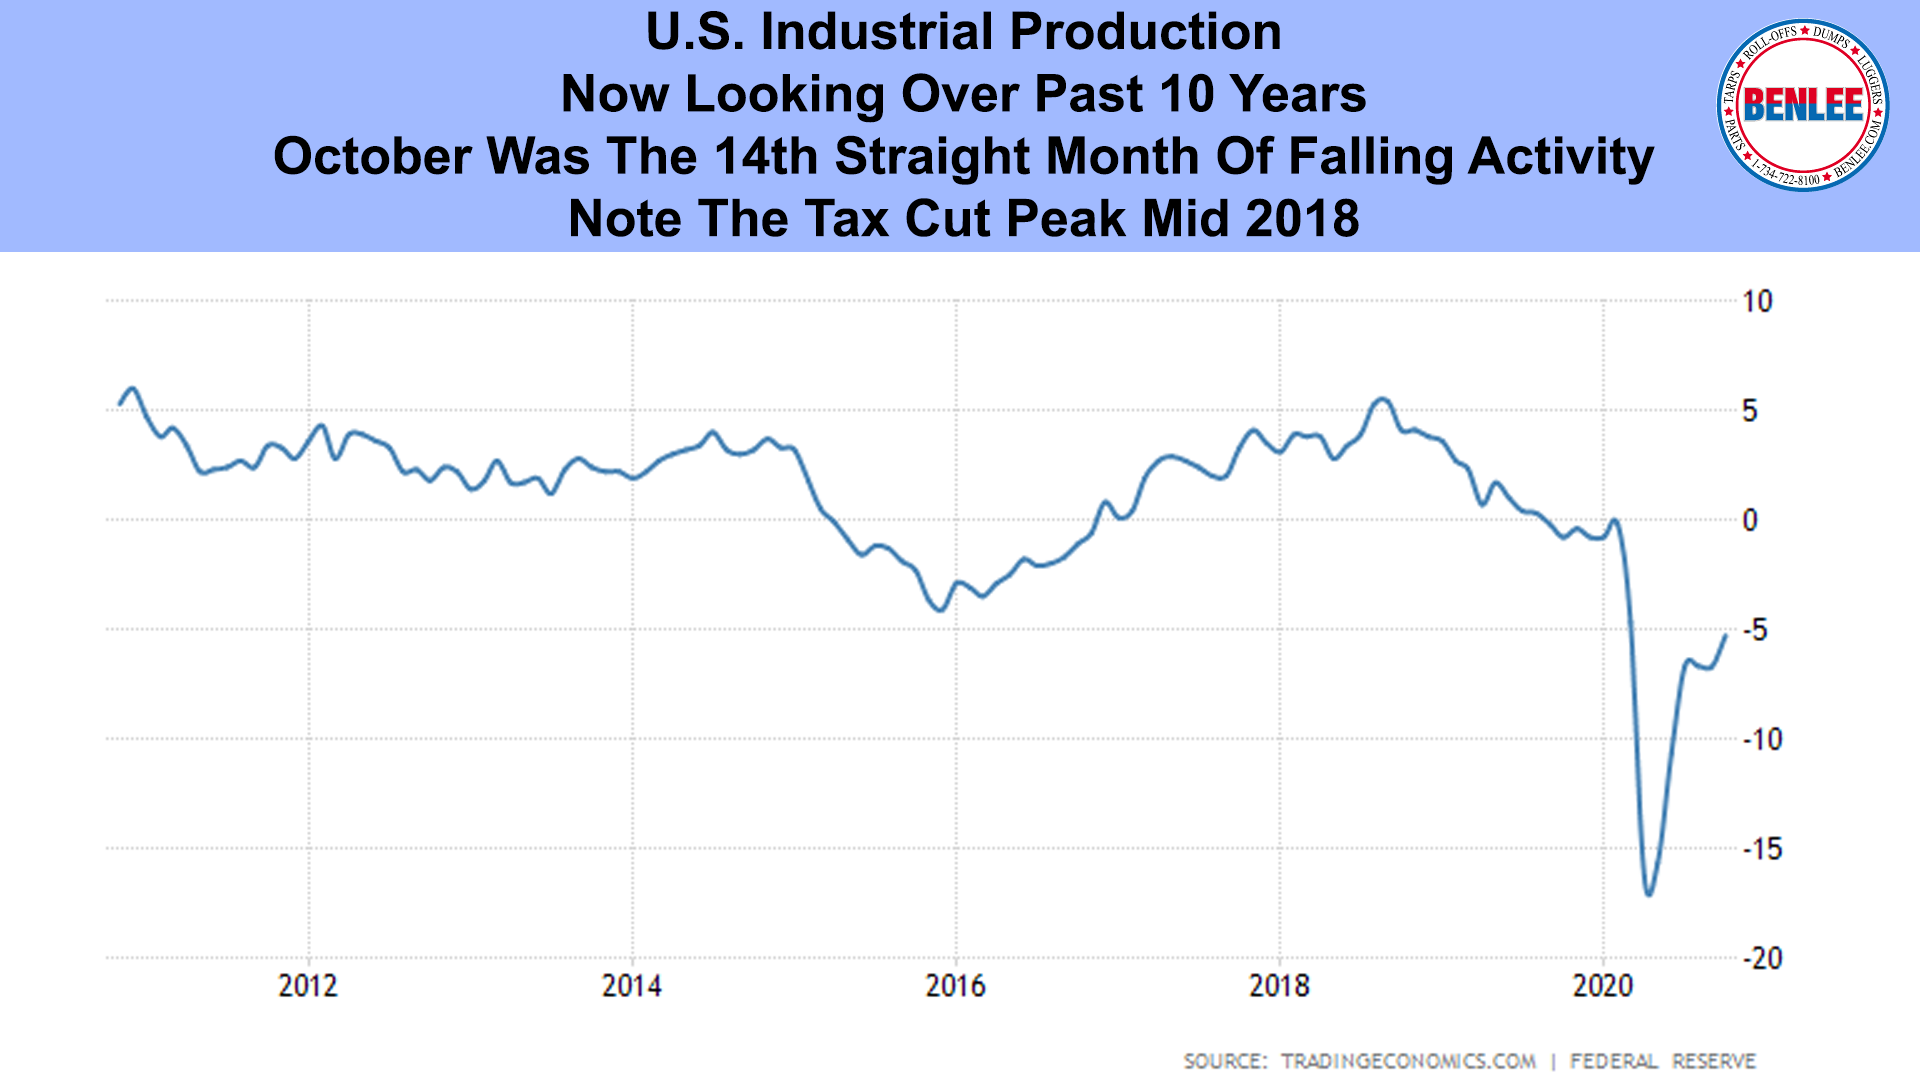 U.S. Industrial Production 10 Year